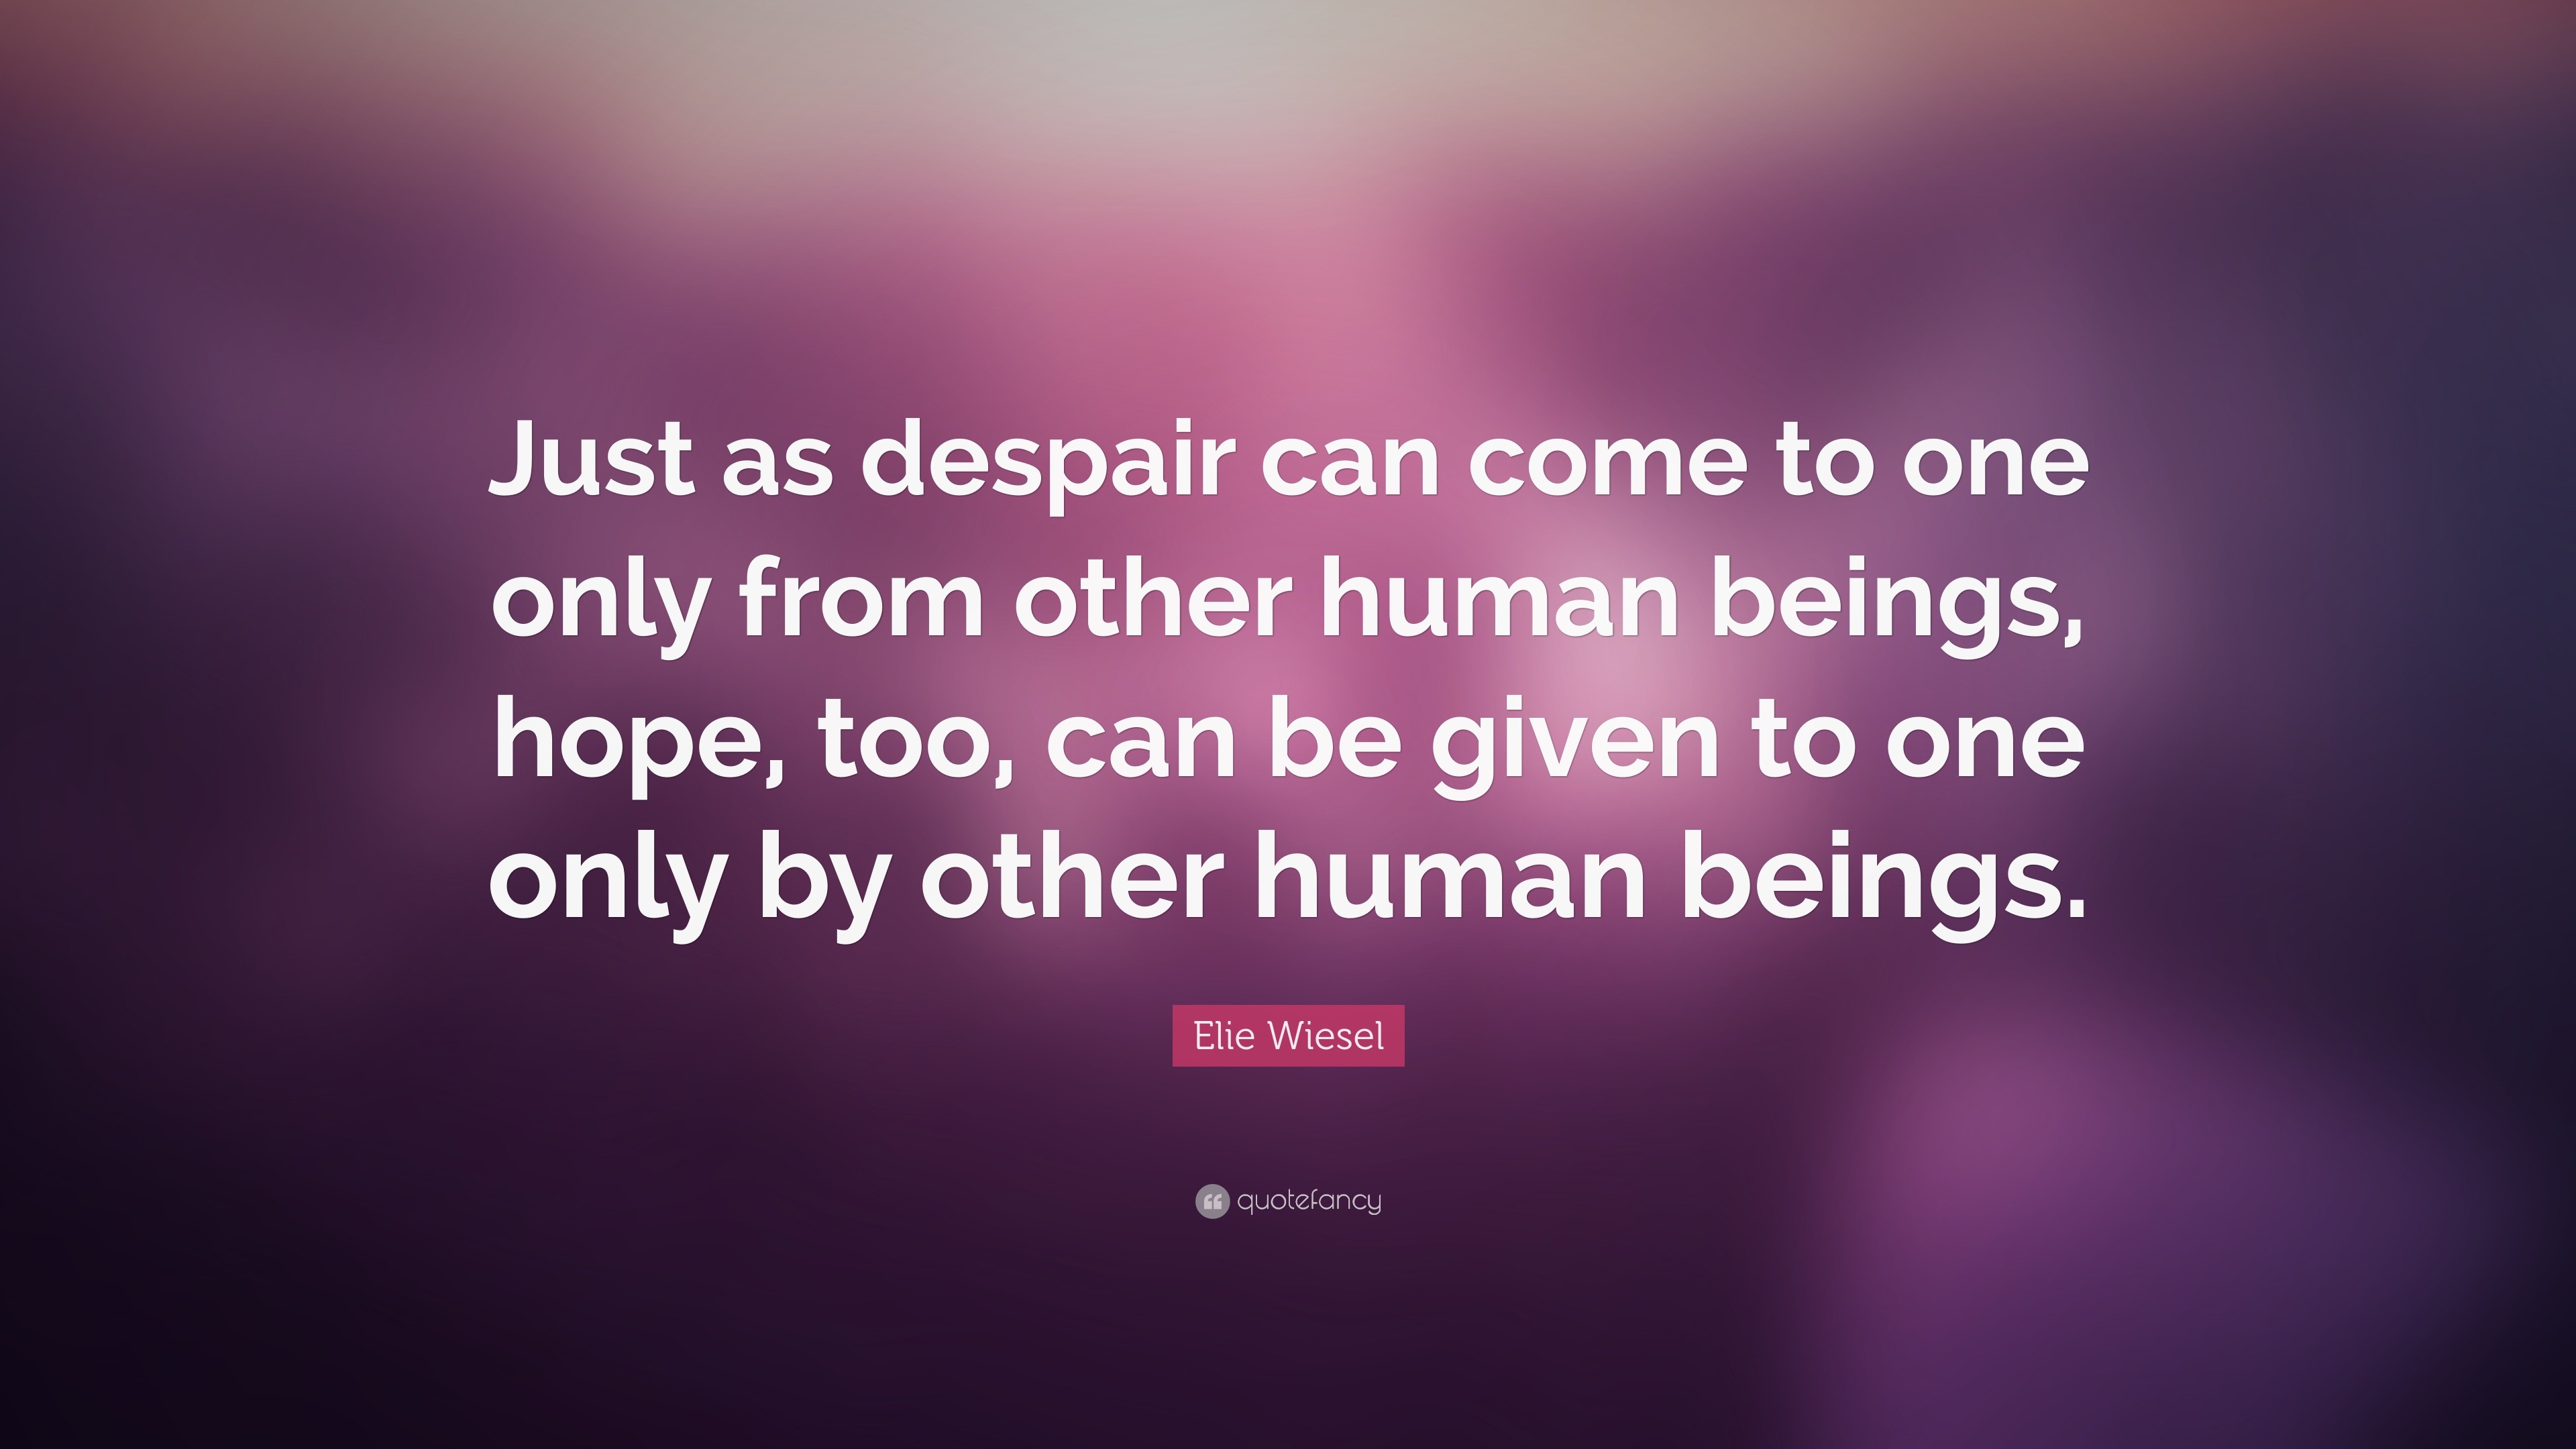 Elie Wiesel Quote: “Just as despair can come to one only from other ...